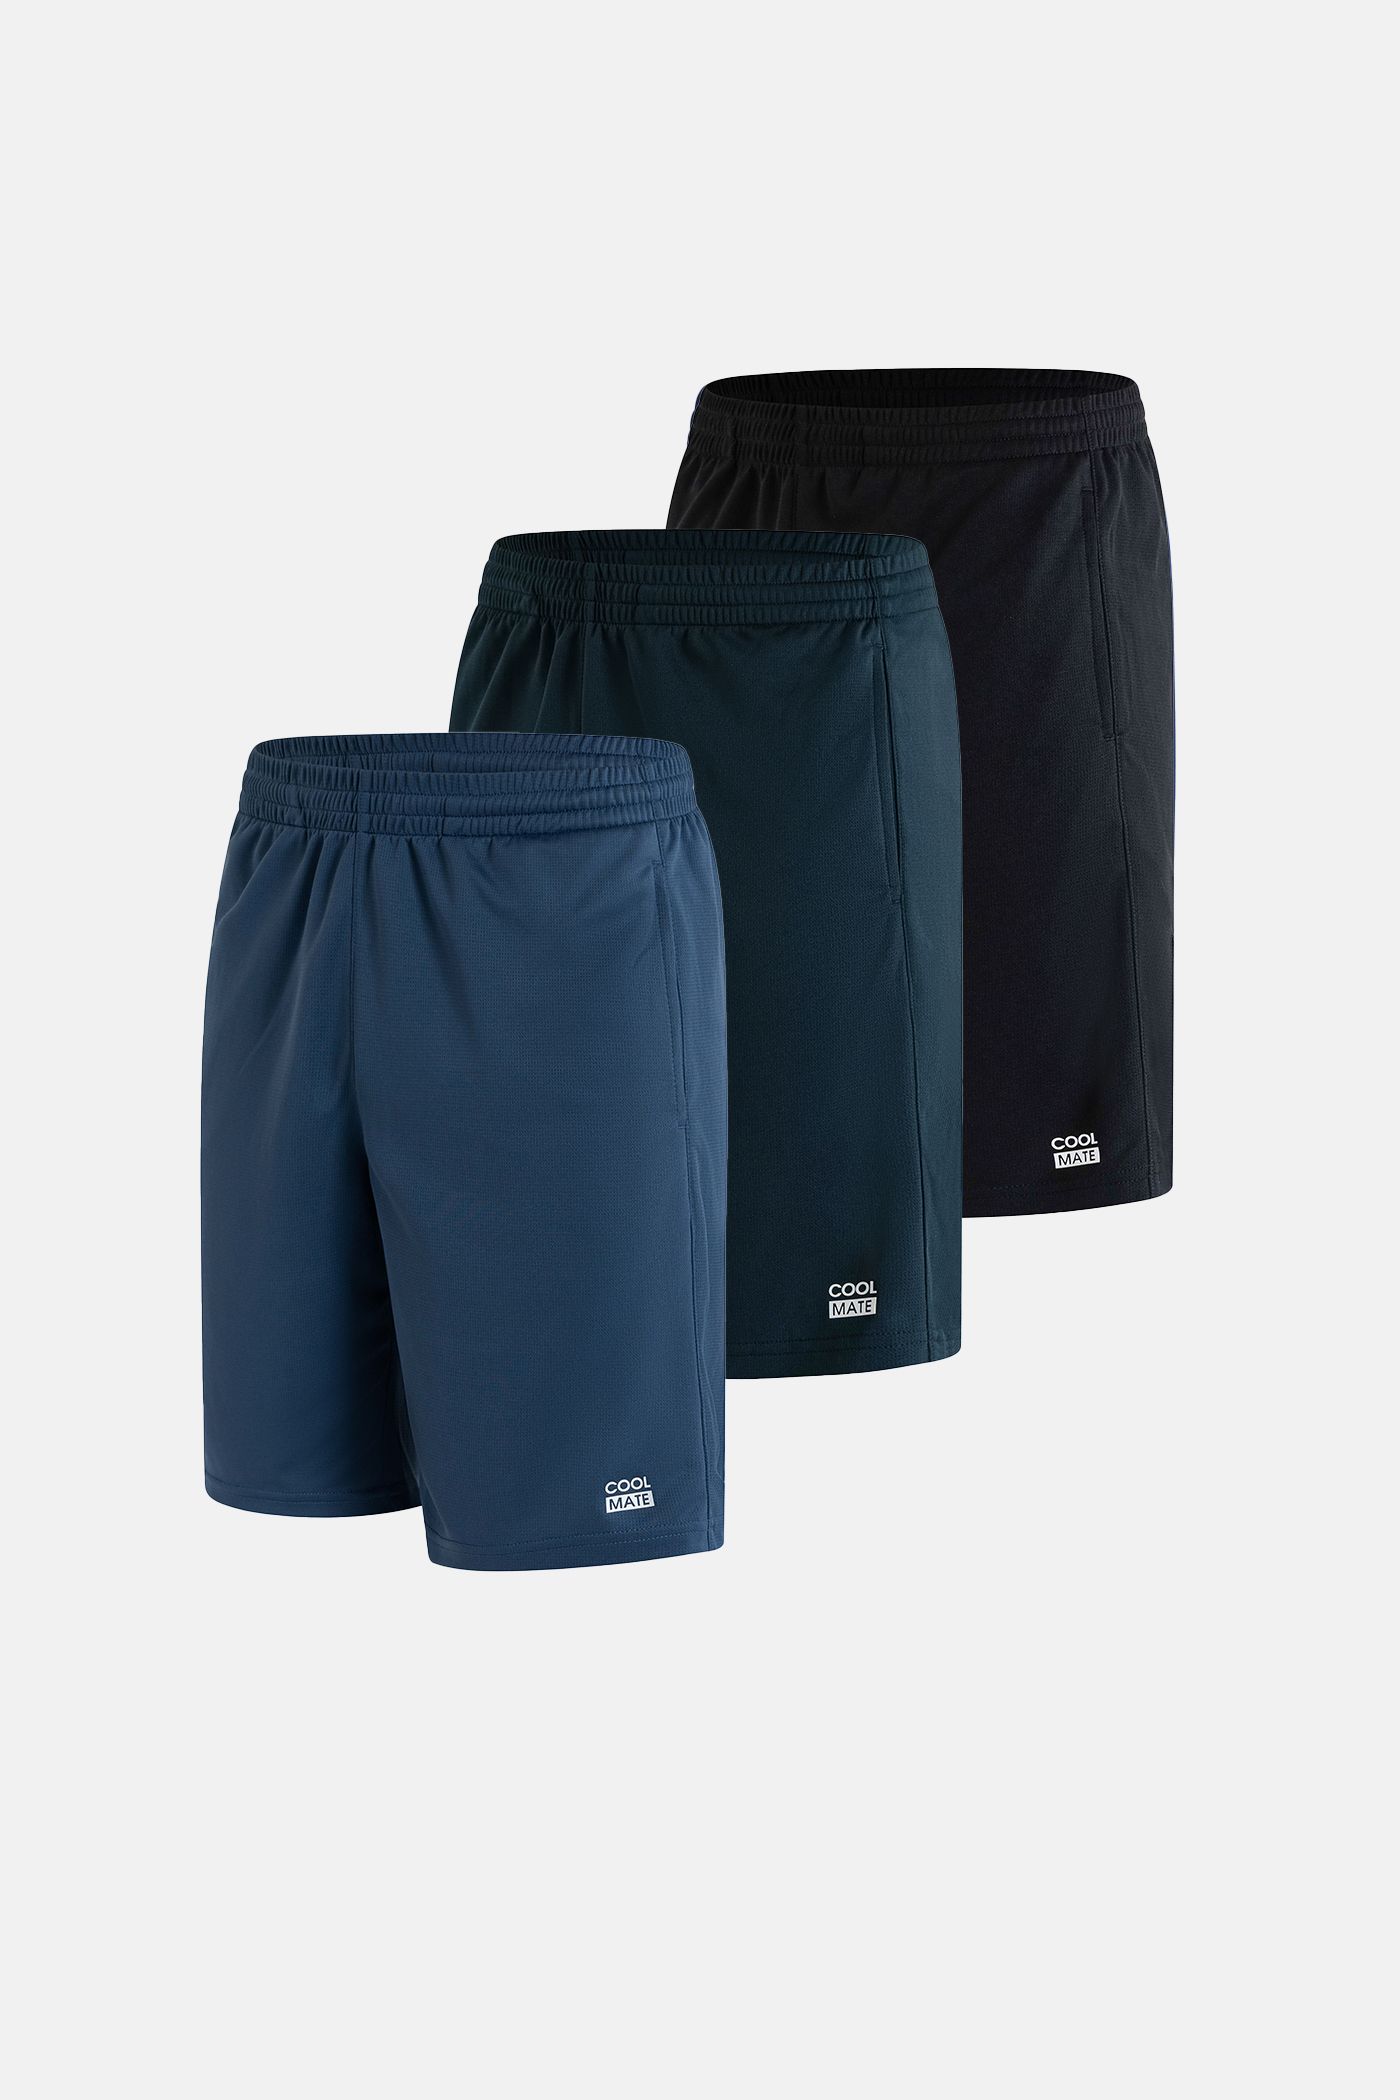 3 Shorts thể thao Promax-S1 